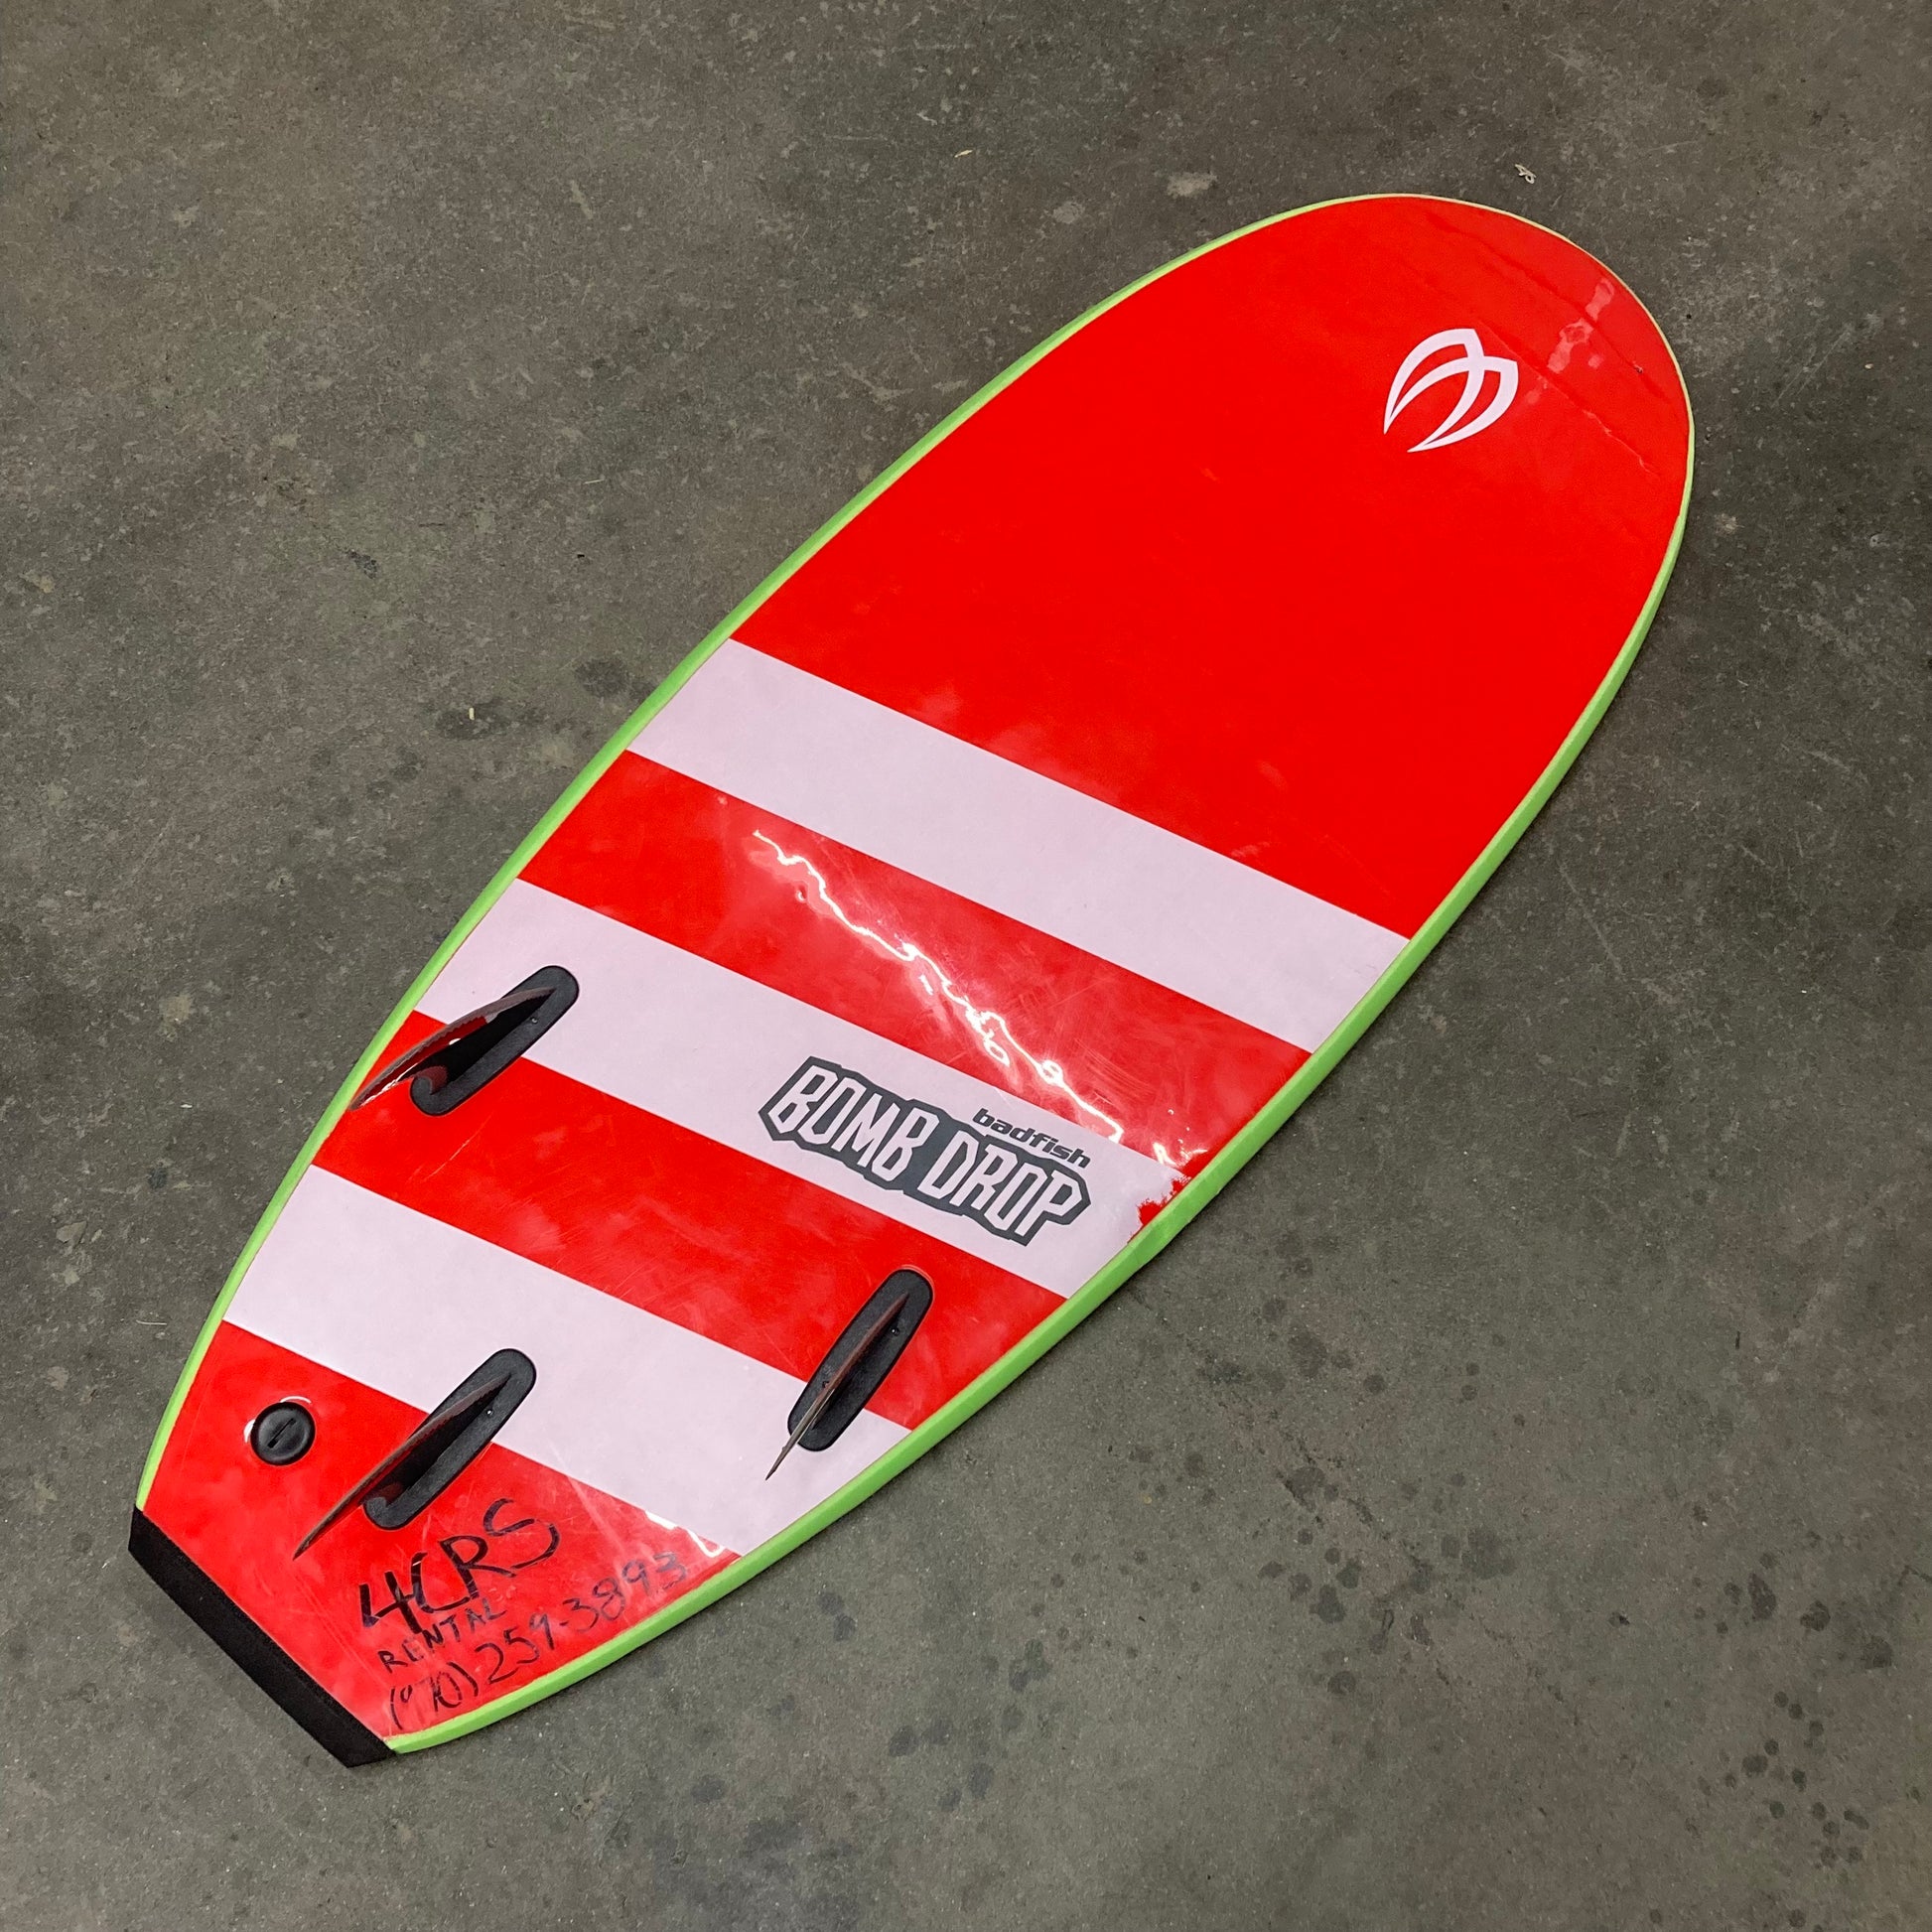 A red and white Demo Bomb Drop surfboard sitting on a concrete floor (brand: Badfish).